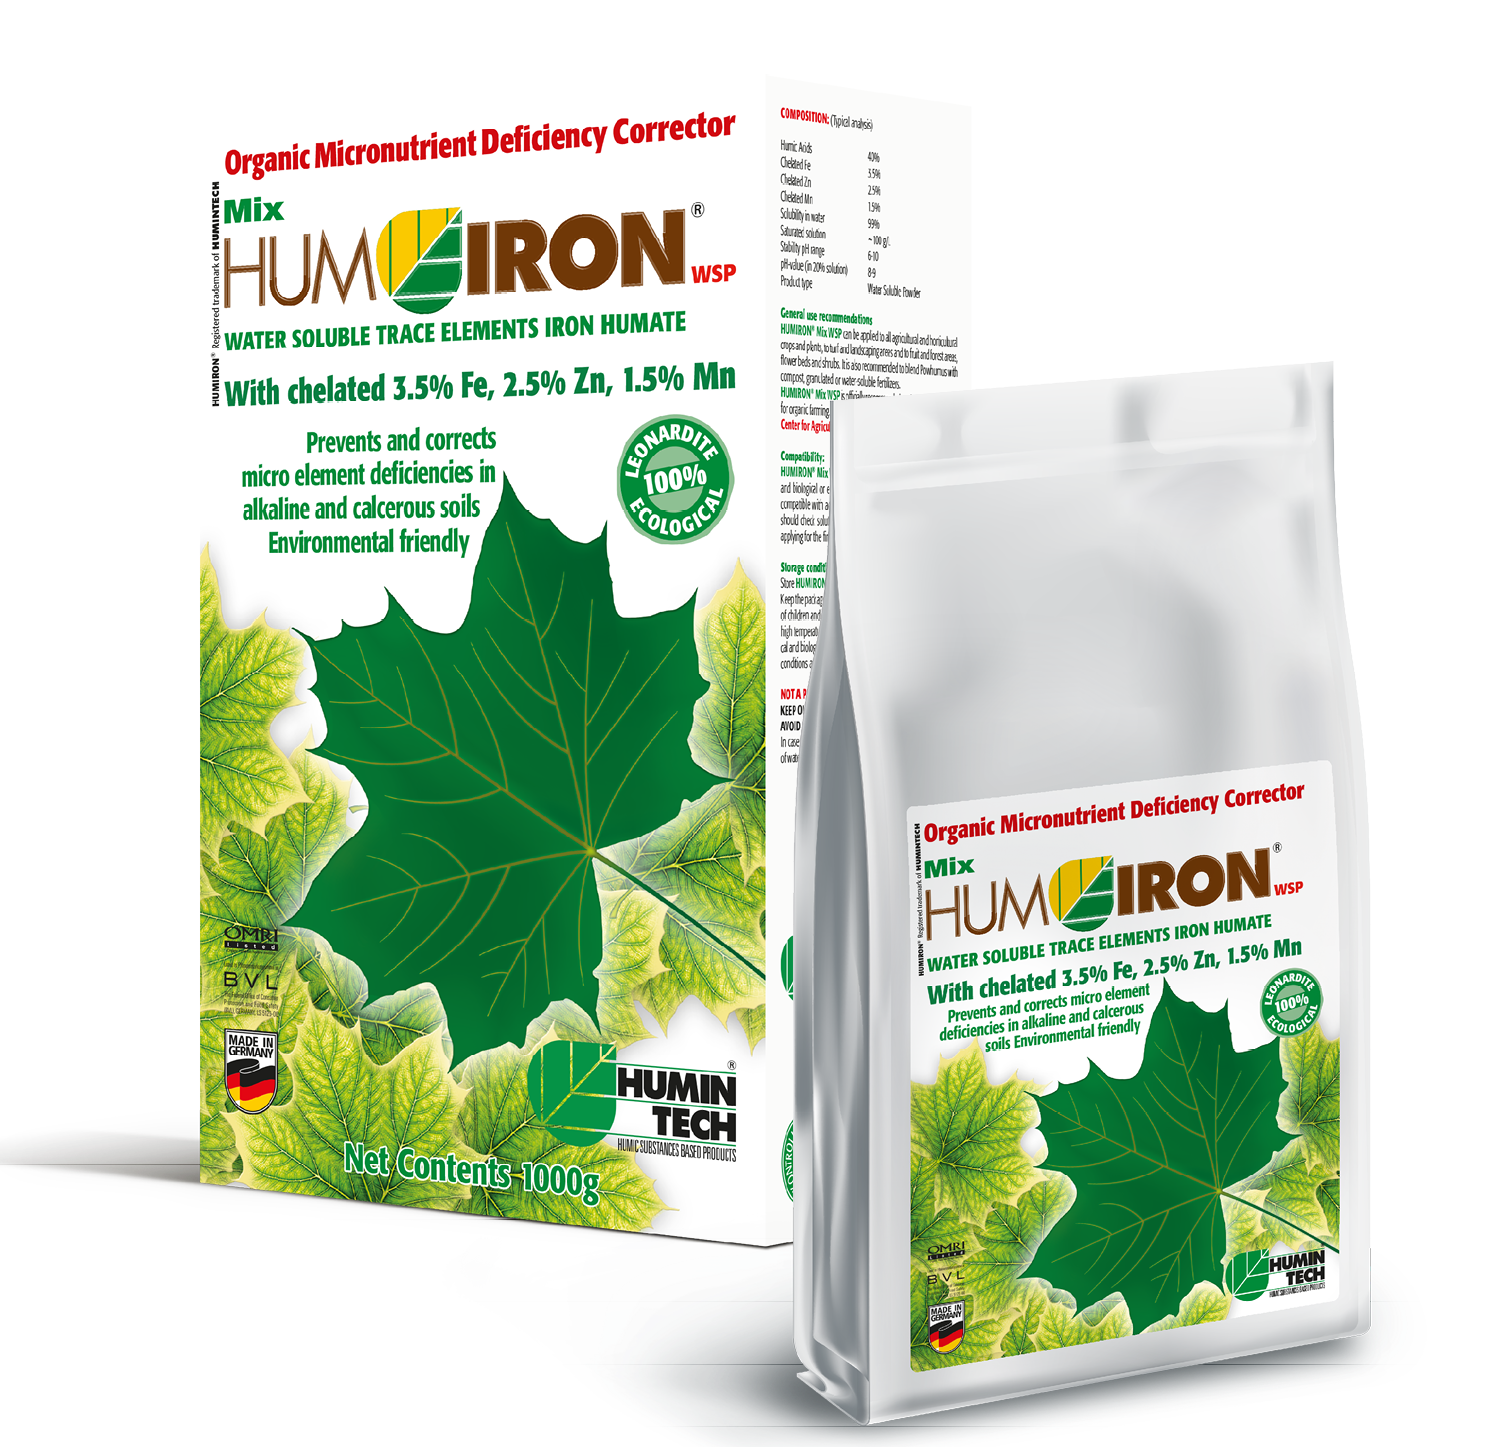 HUMINTECH agrarculture product HUMIRON Mix WSP